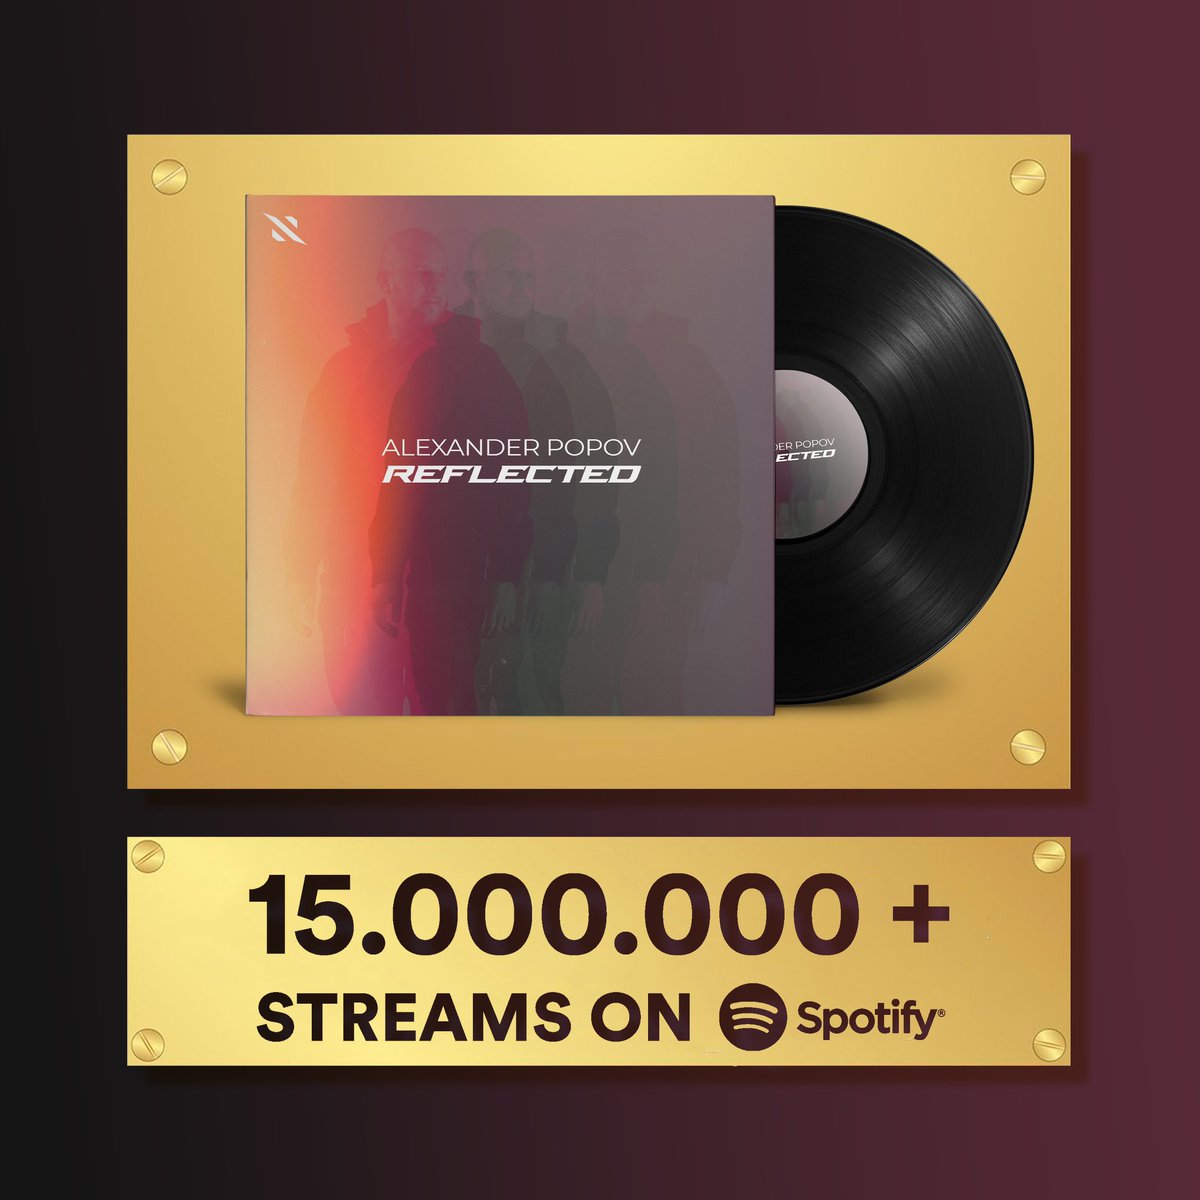 15+ million listeners to my new album ‘Reflected’ on @Spotify, thank you for your support 🙏🏻💚 open.spotify.com/album/4APhgxD9…